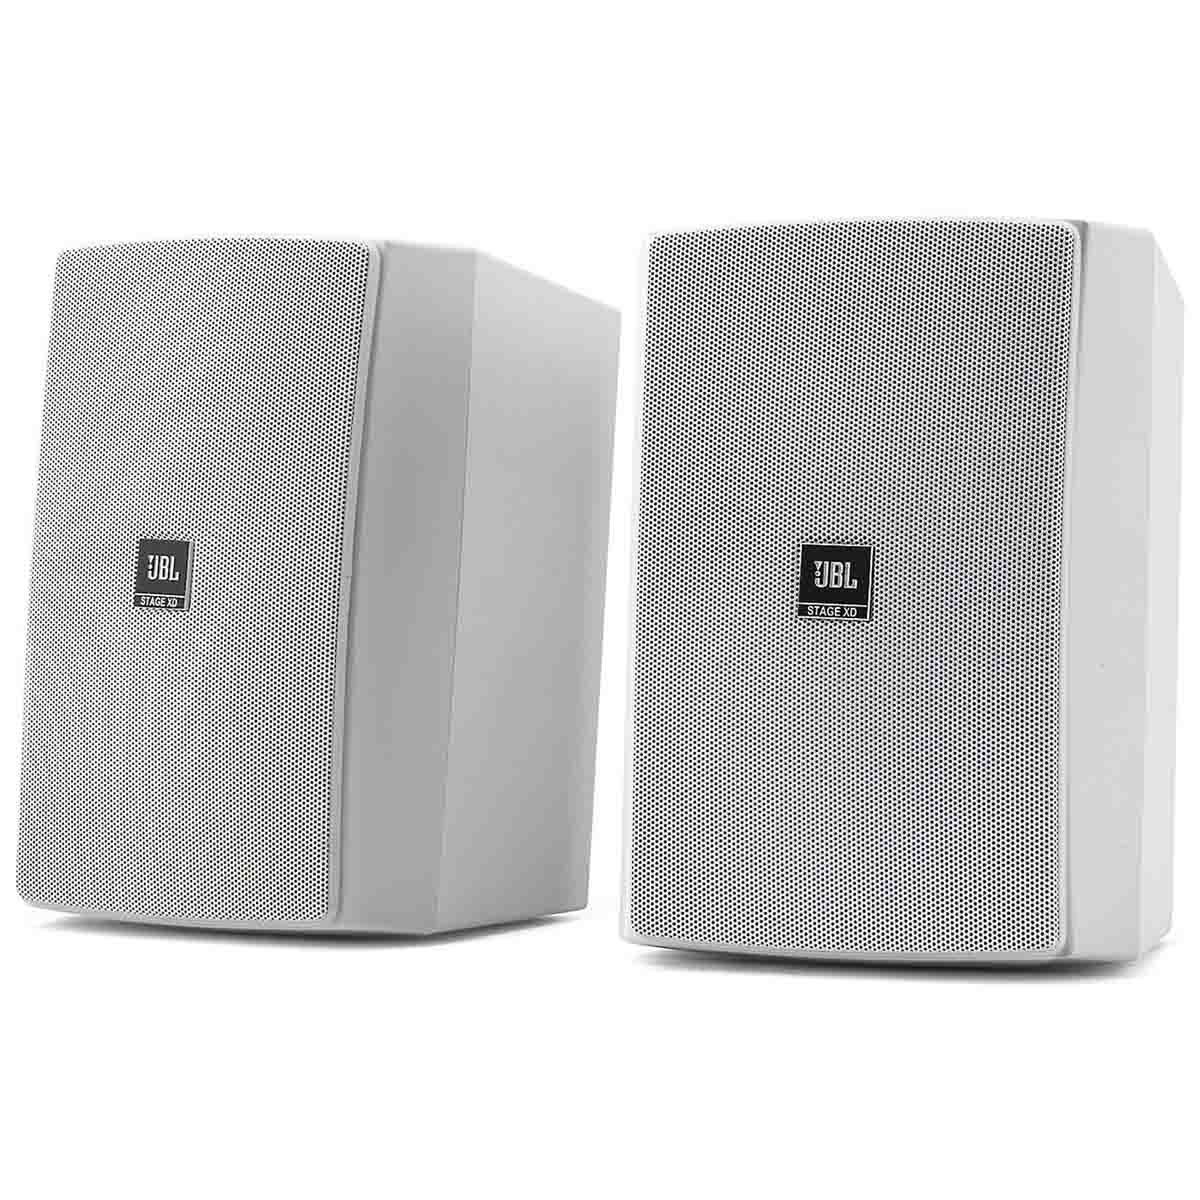 JBL Stage XD-5 5.25" Outdoor Speaker IP67 Rated - White - Pair - angled front view of pair